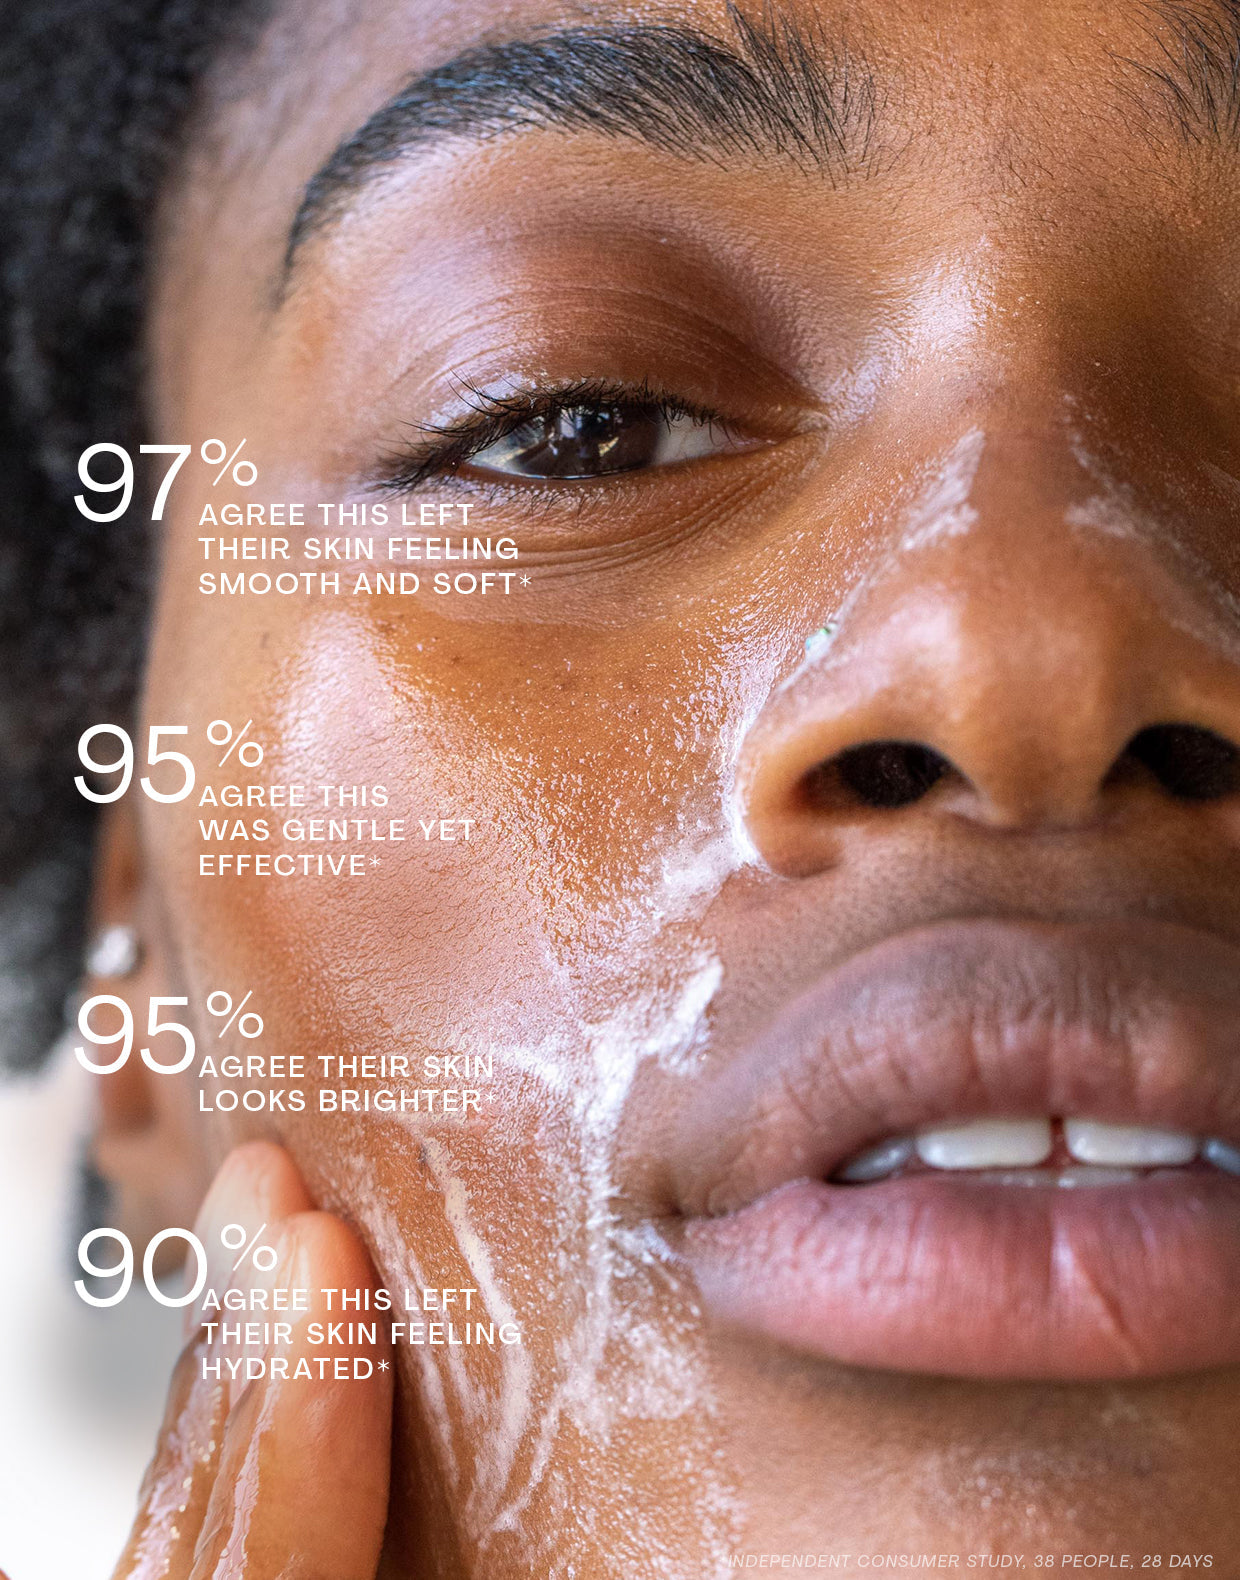 Photo of model washing her face with The Outset cleanser with claims from customers on top of photo. 97% agree this left their skin feeling soft and smooth; 95% agree this was gentle yet effective;95% agree their skin looks brighter; 90% agree this left their skin feeling hydrated *independent consumer study, 38 people, 28 days